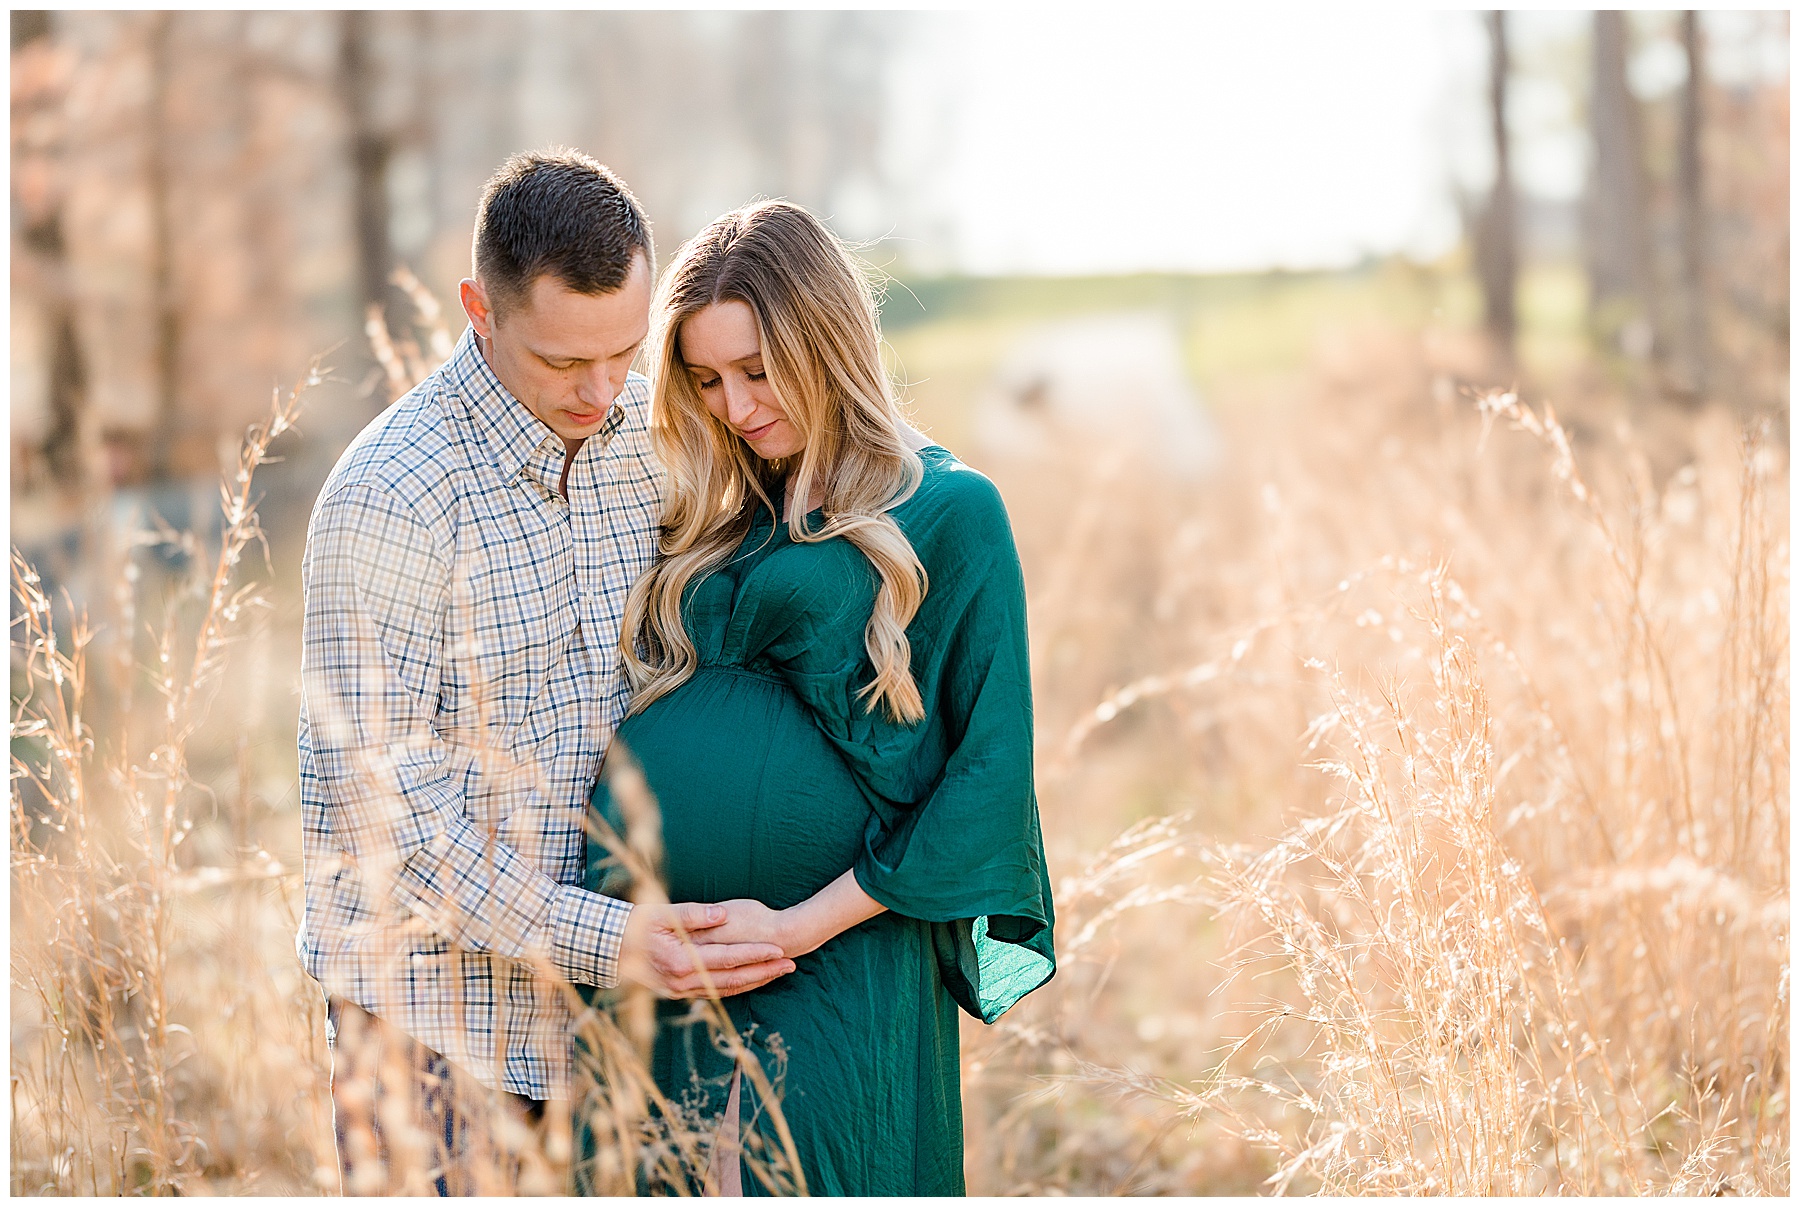 Maternity session in maryland